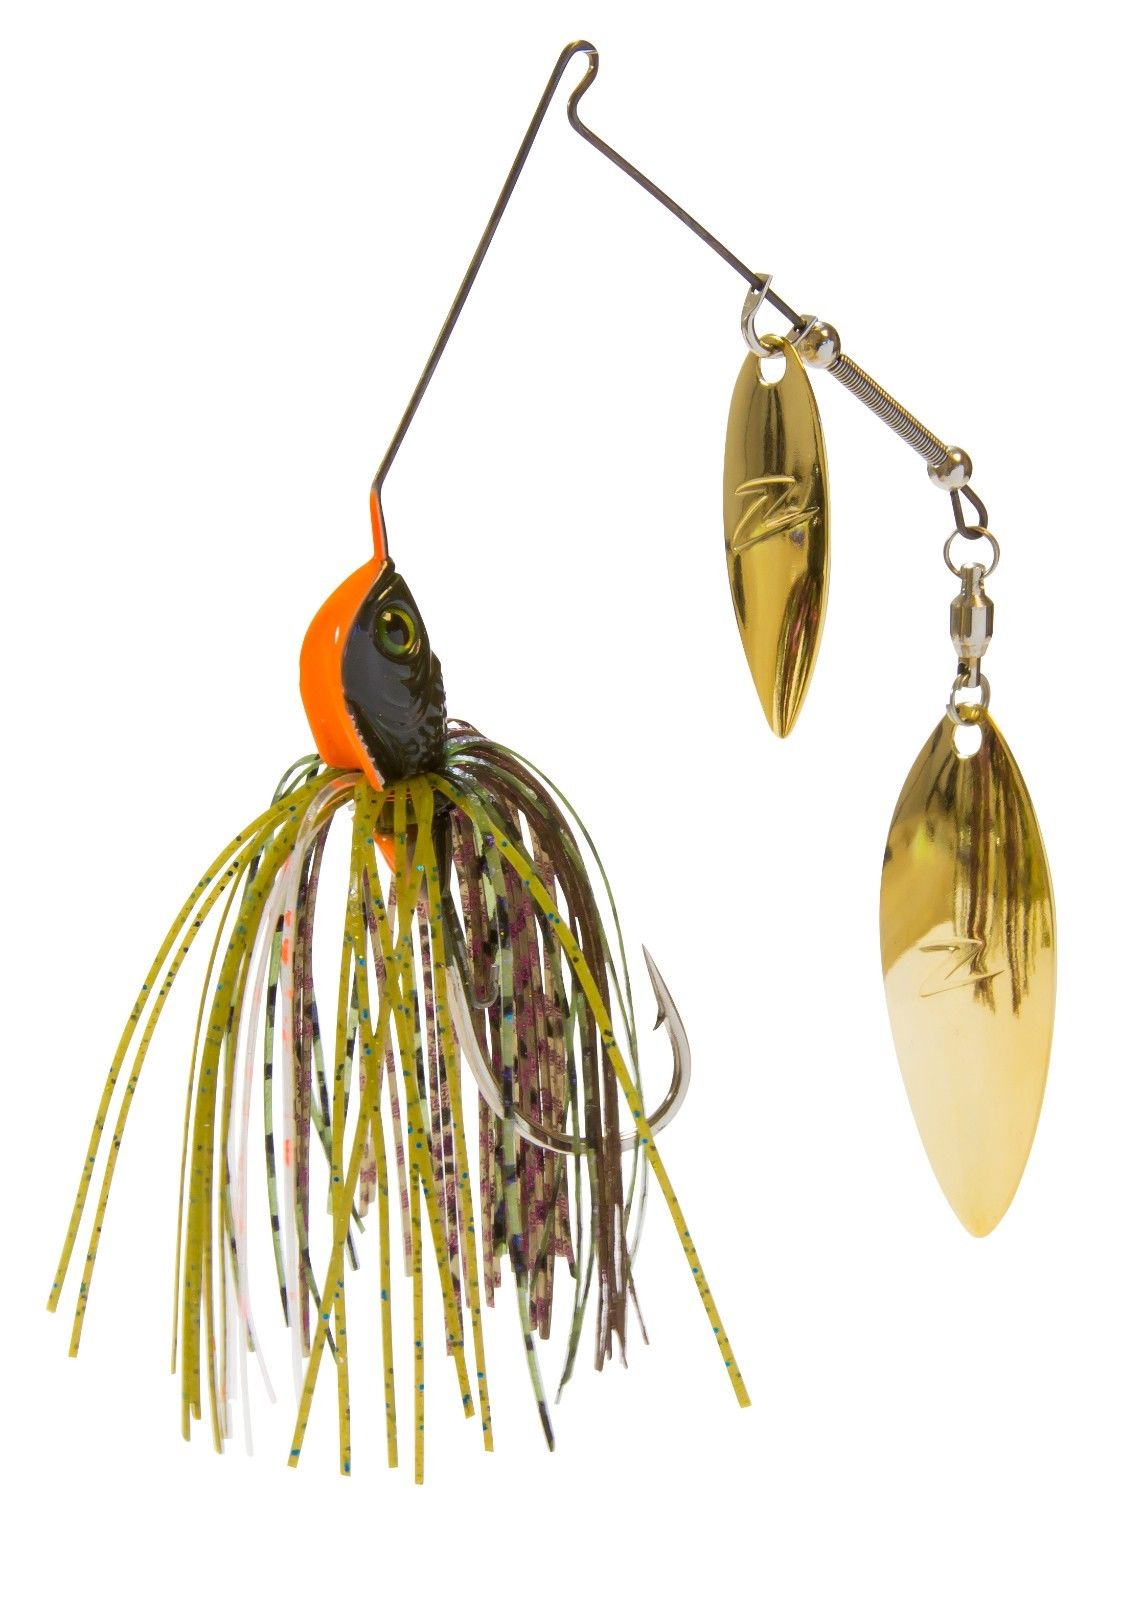 Z Man SlingbladeZ Double Willow Spinnerbait Bass Fishing Lure